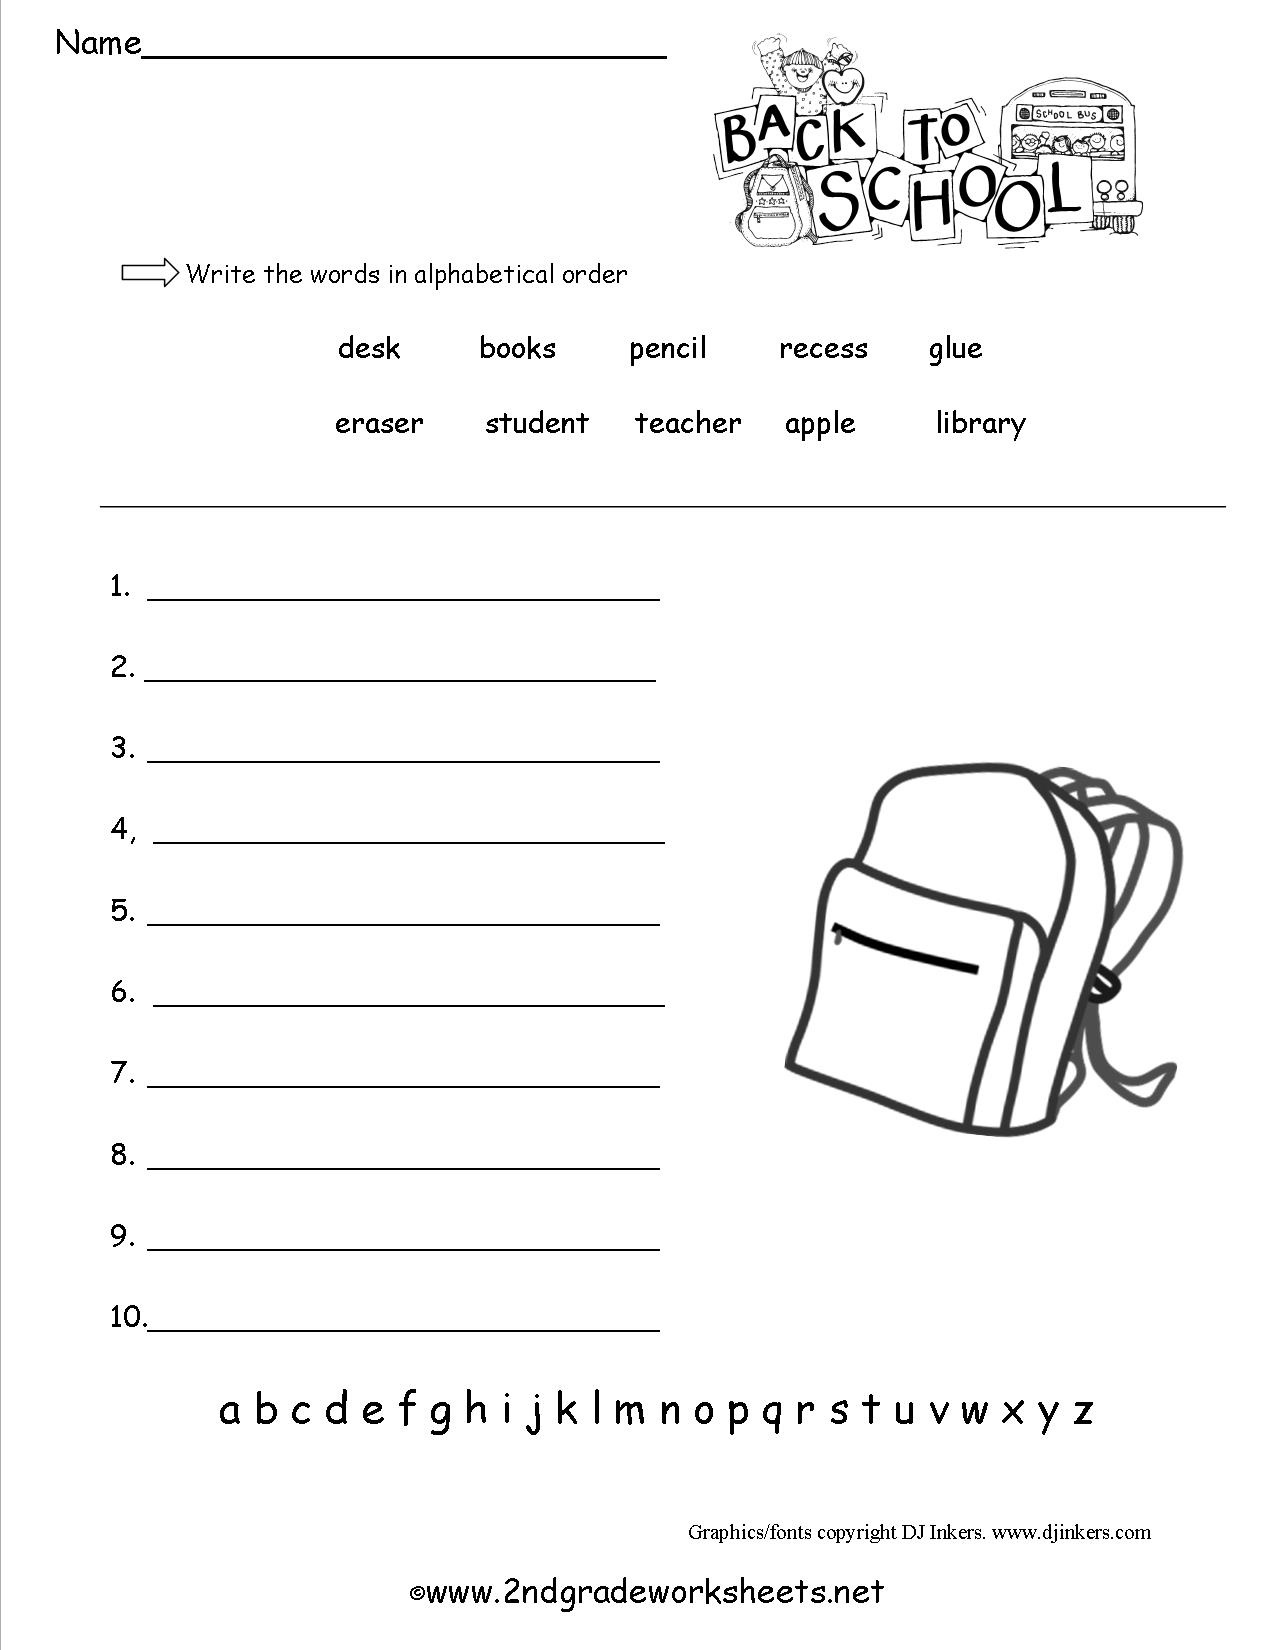 Free Back To School Worksheets And Printouts - Free Printable Classroom Worksheets